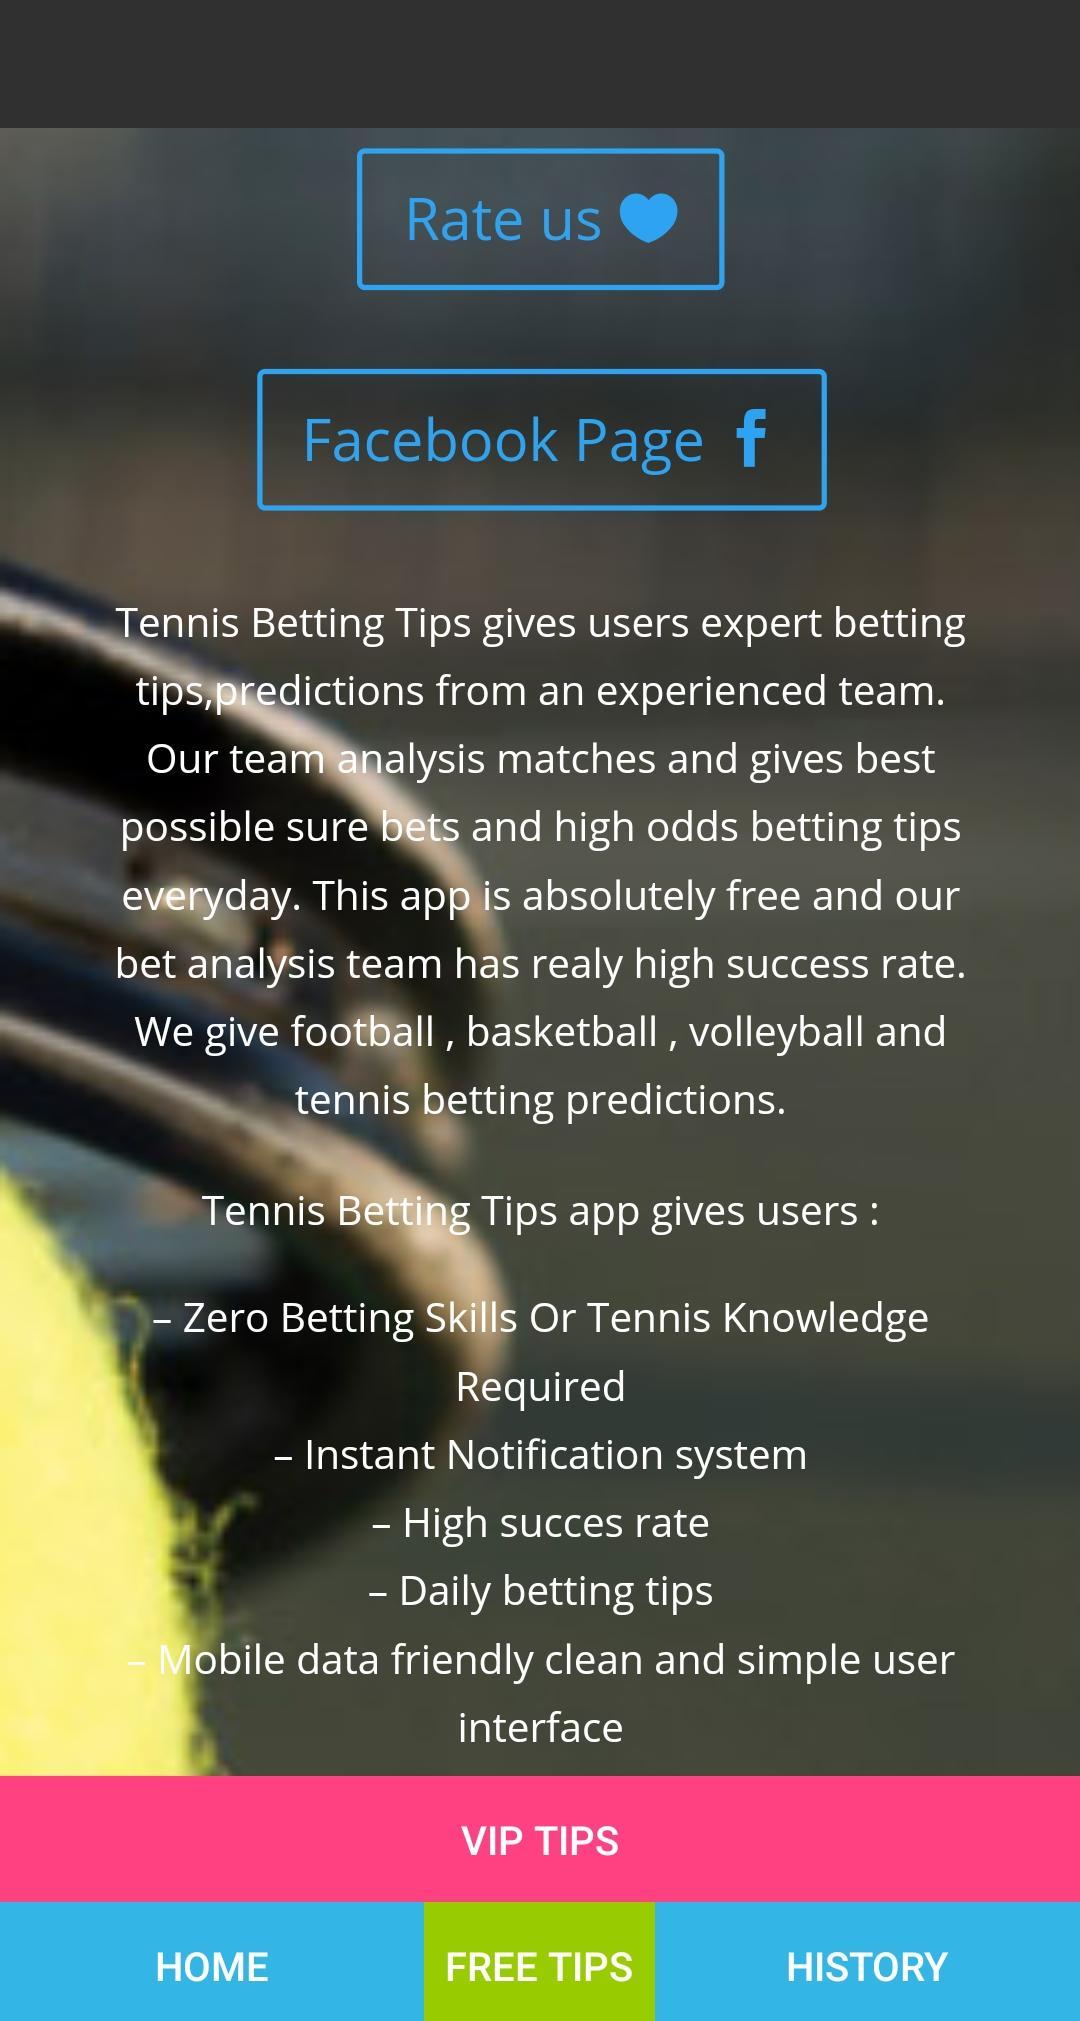 Tennis Betting Tips for Android - APK Download